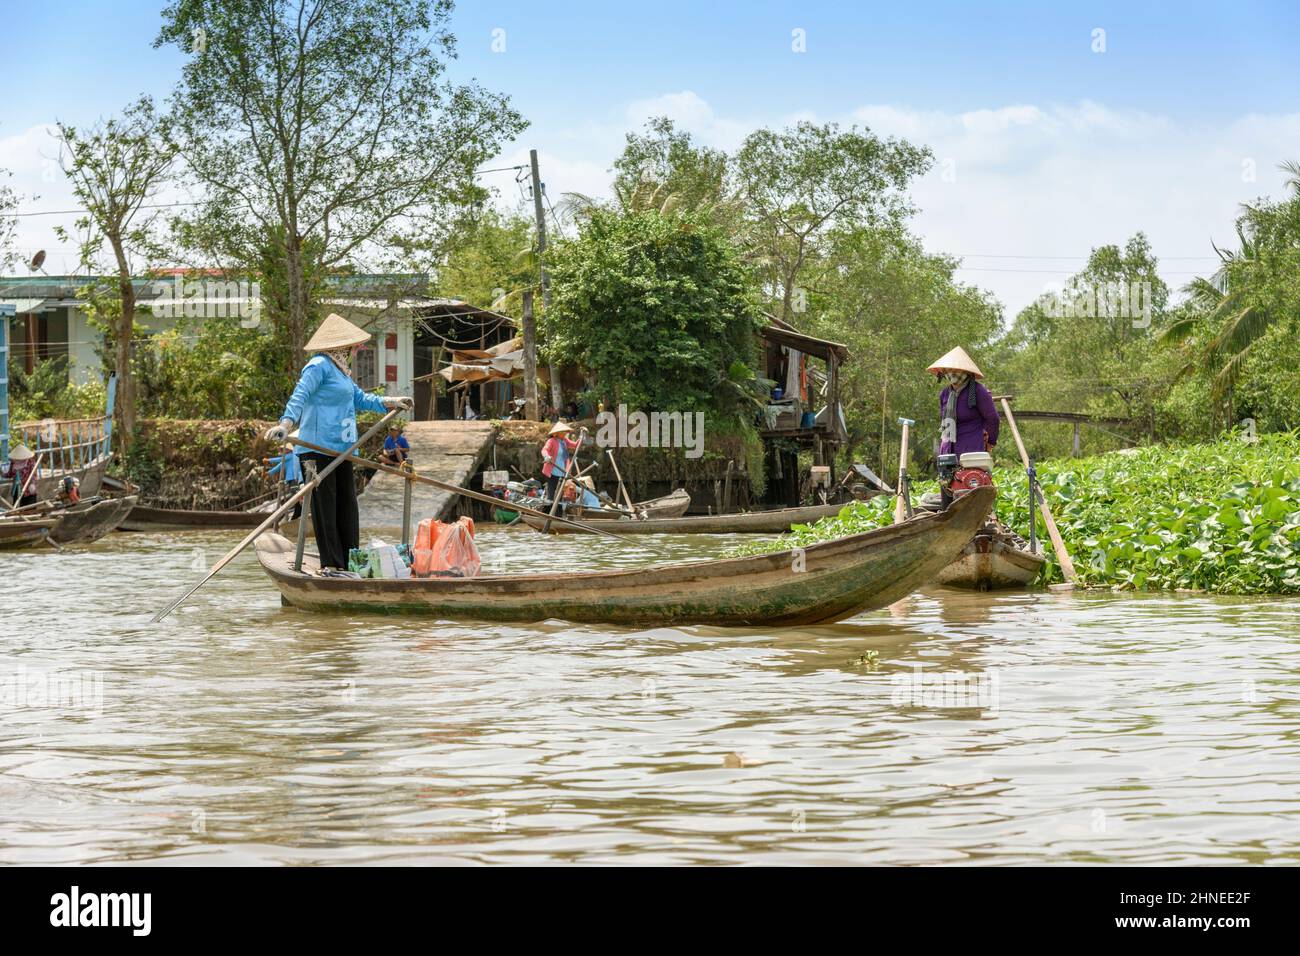 Vietnamese women with traditional wooden rowing boats (sampans) on the Mekong River, Mekong Delta, Vinh Long Province, southern Vietnam Stock Photo